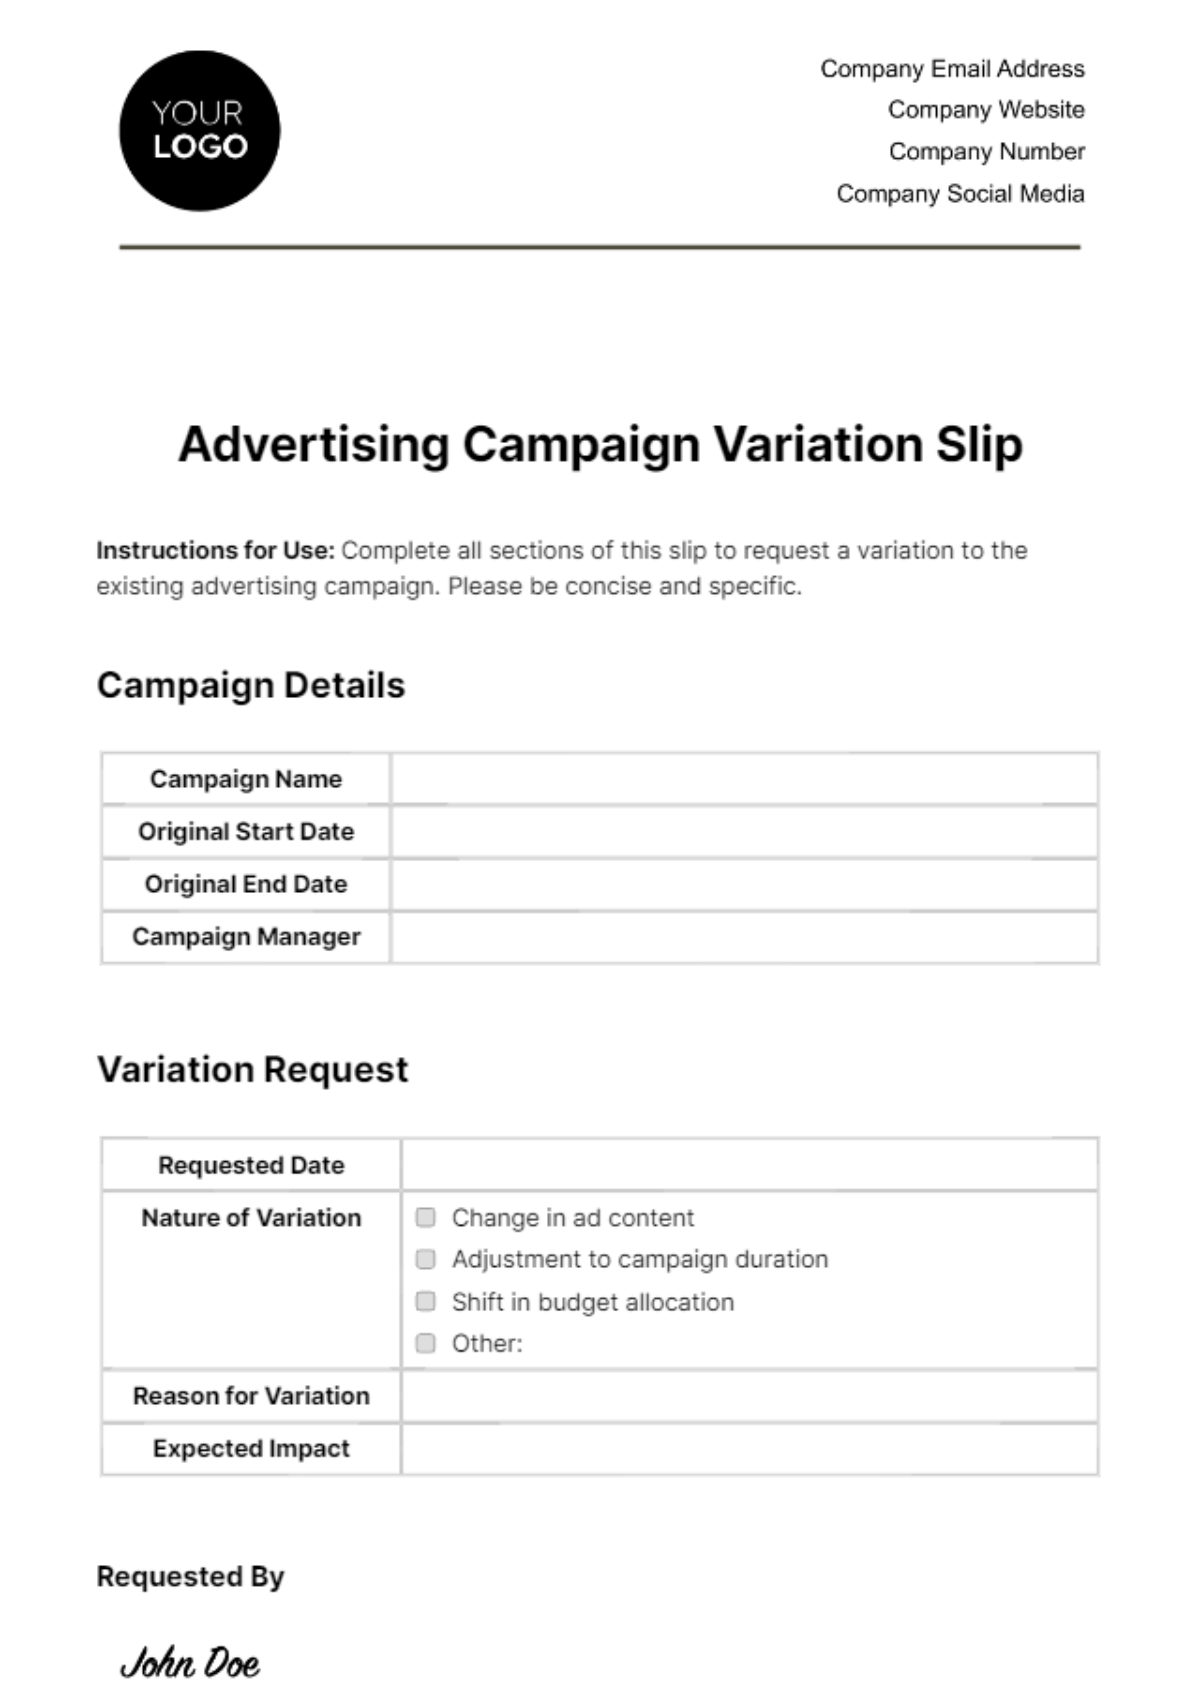 Free Advertising Campaign Variation Slip Template